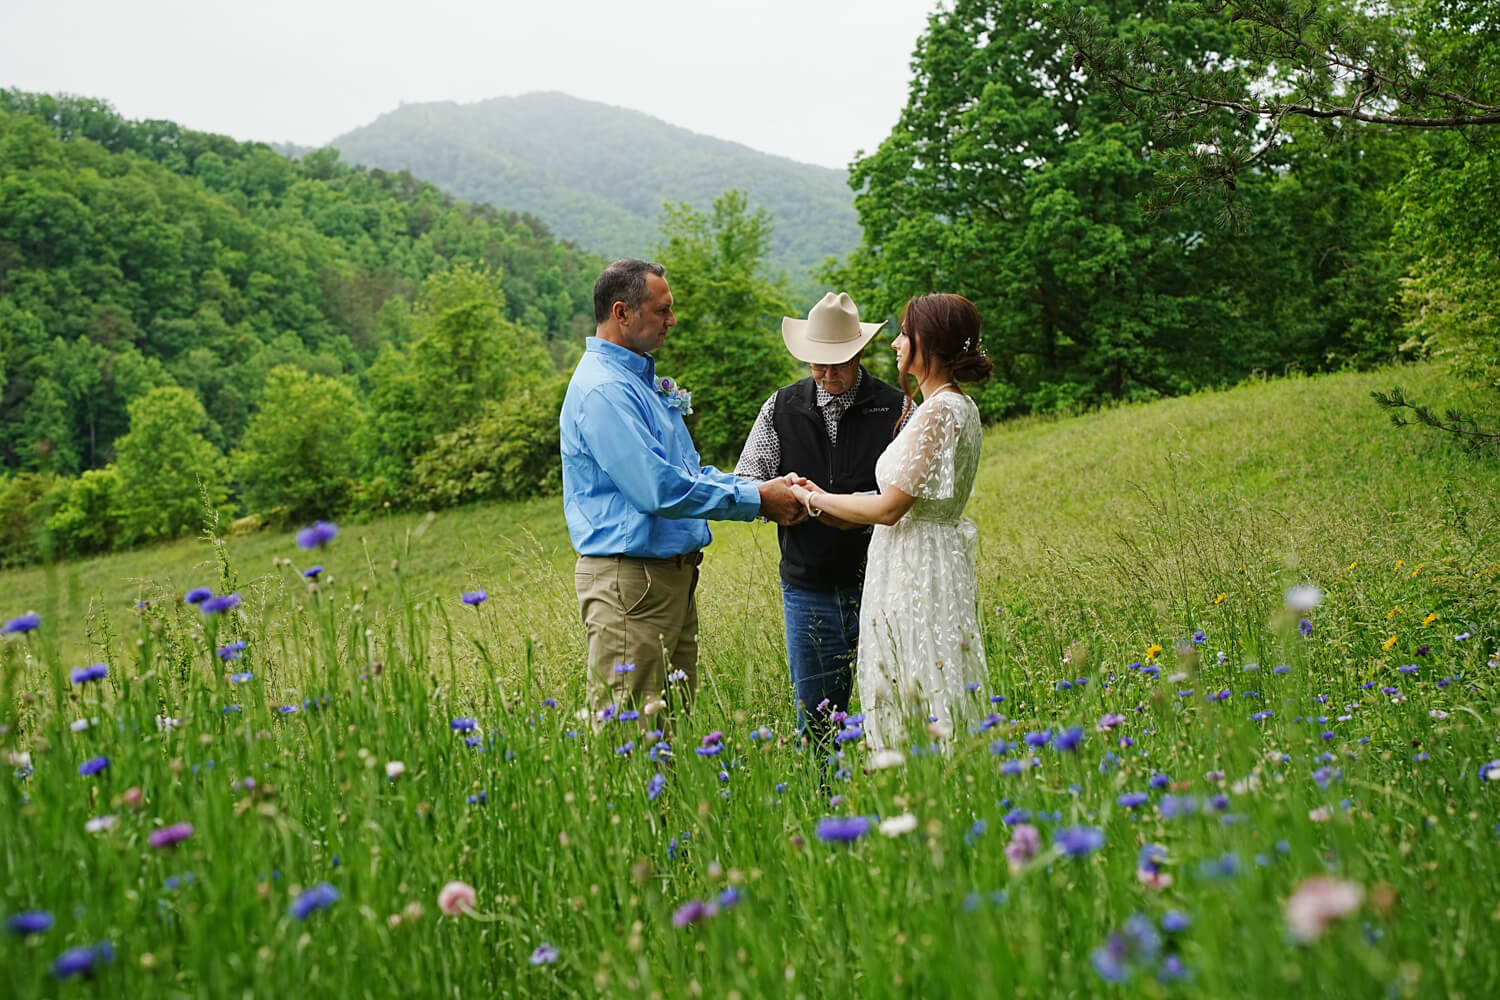 Couple getting married in a field of wildflowers at a mountain view